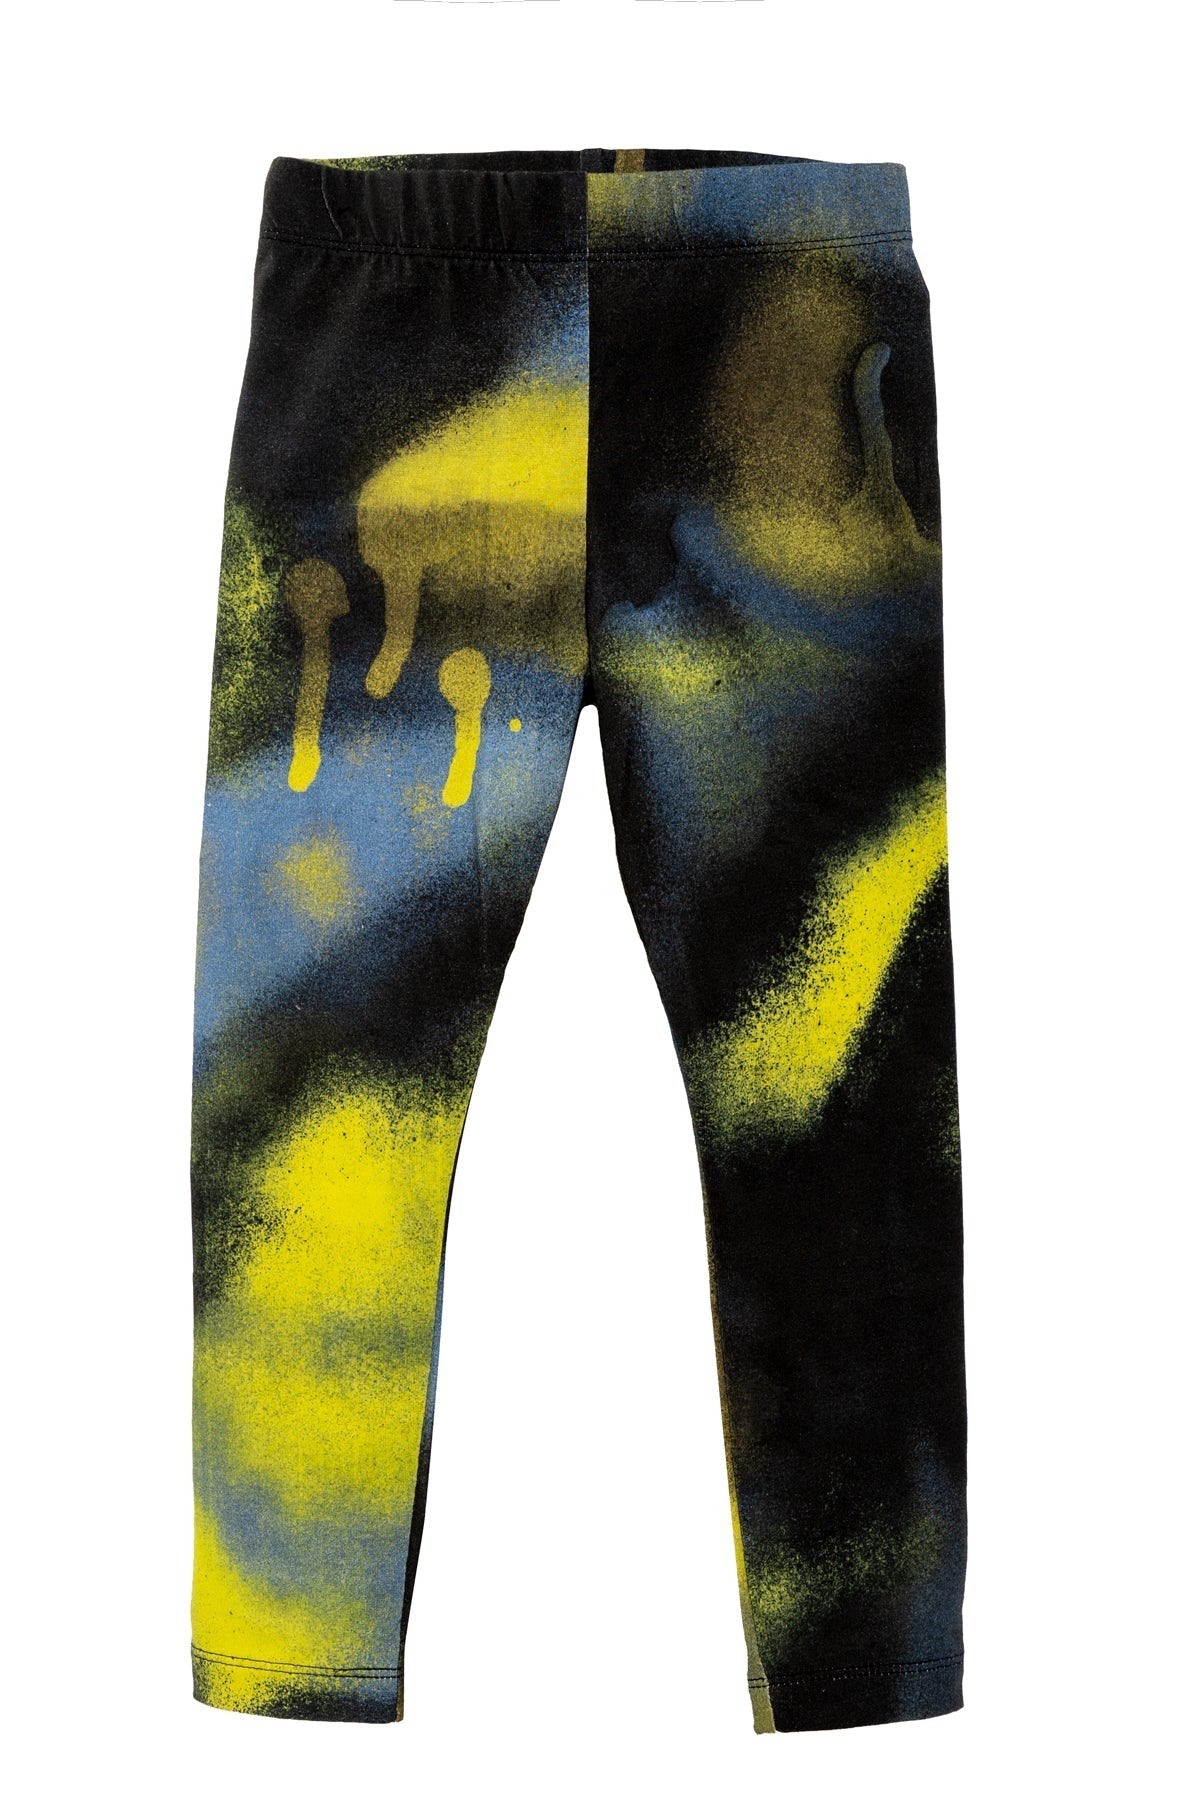 M'A KIDS YELLOW AND BLACK LEGGINGS 